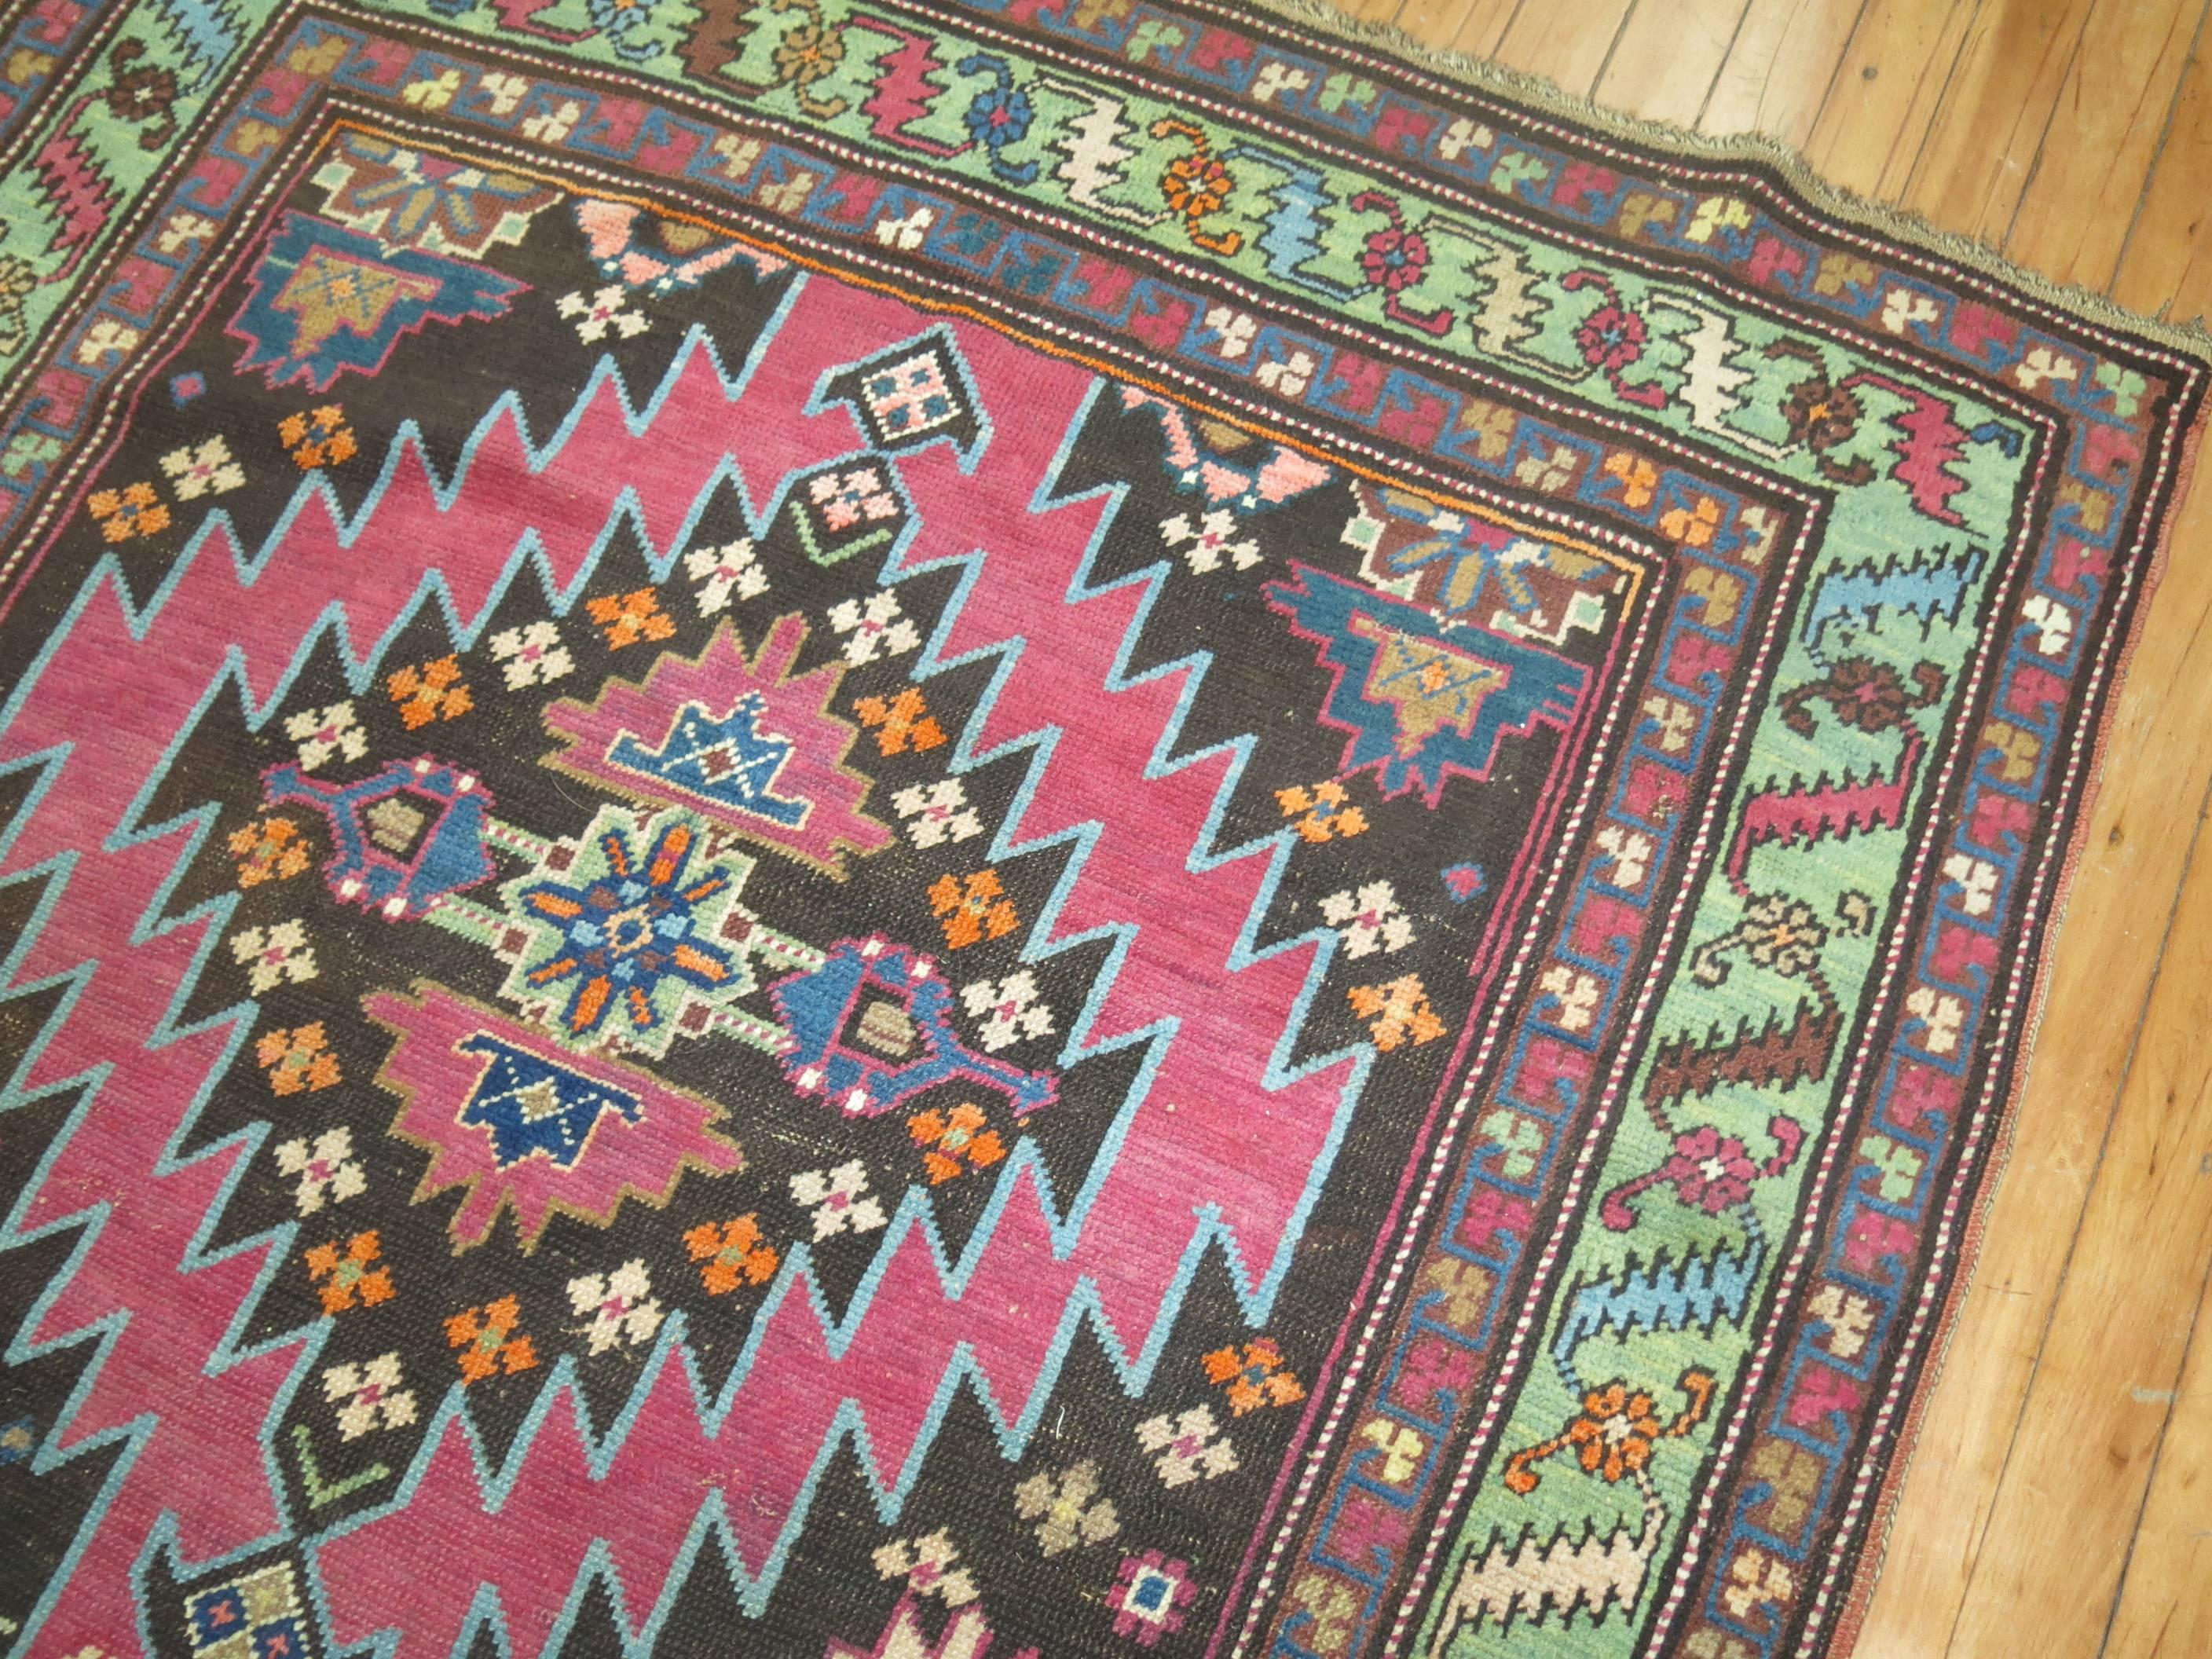 Russian Vintage Karabagh Runner in Bright Pink & Chartreuse For Sale